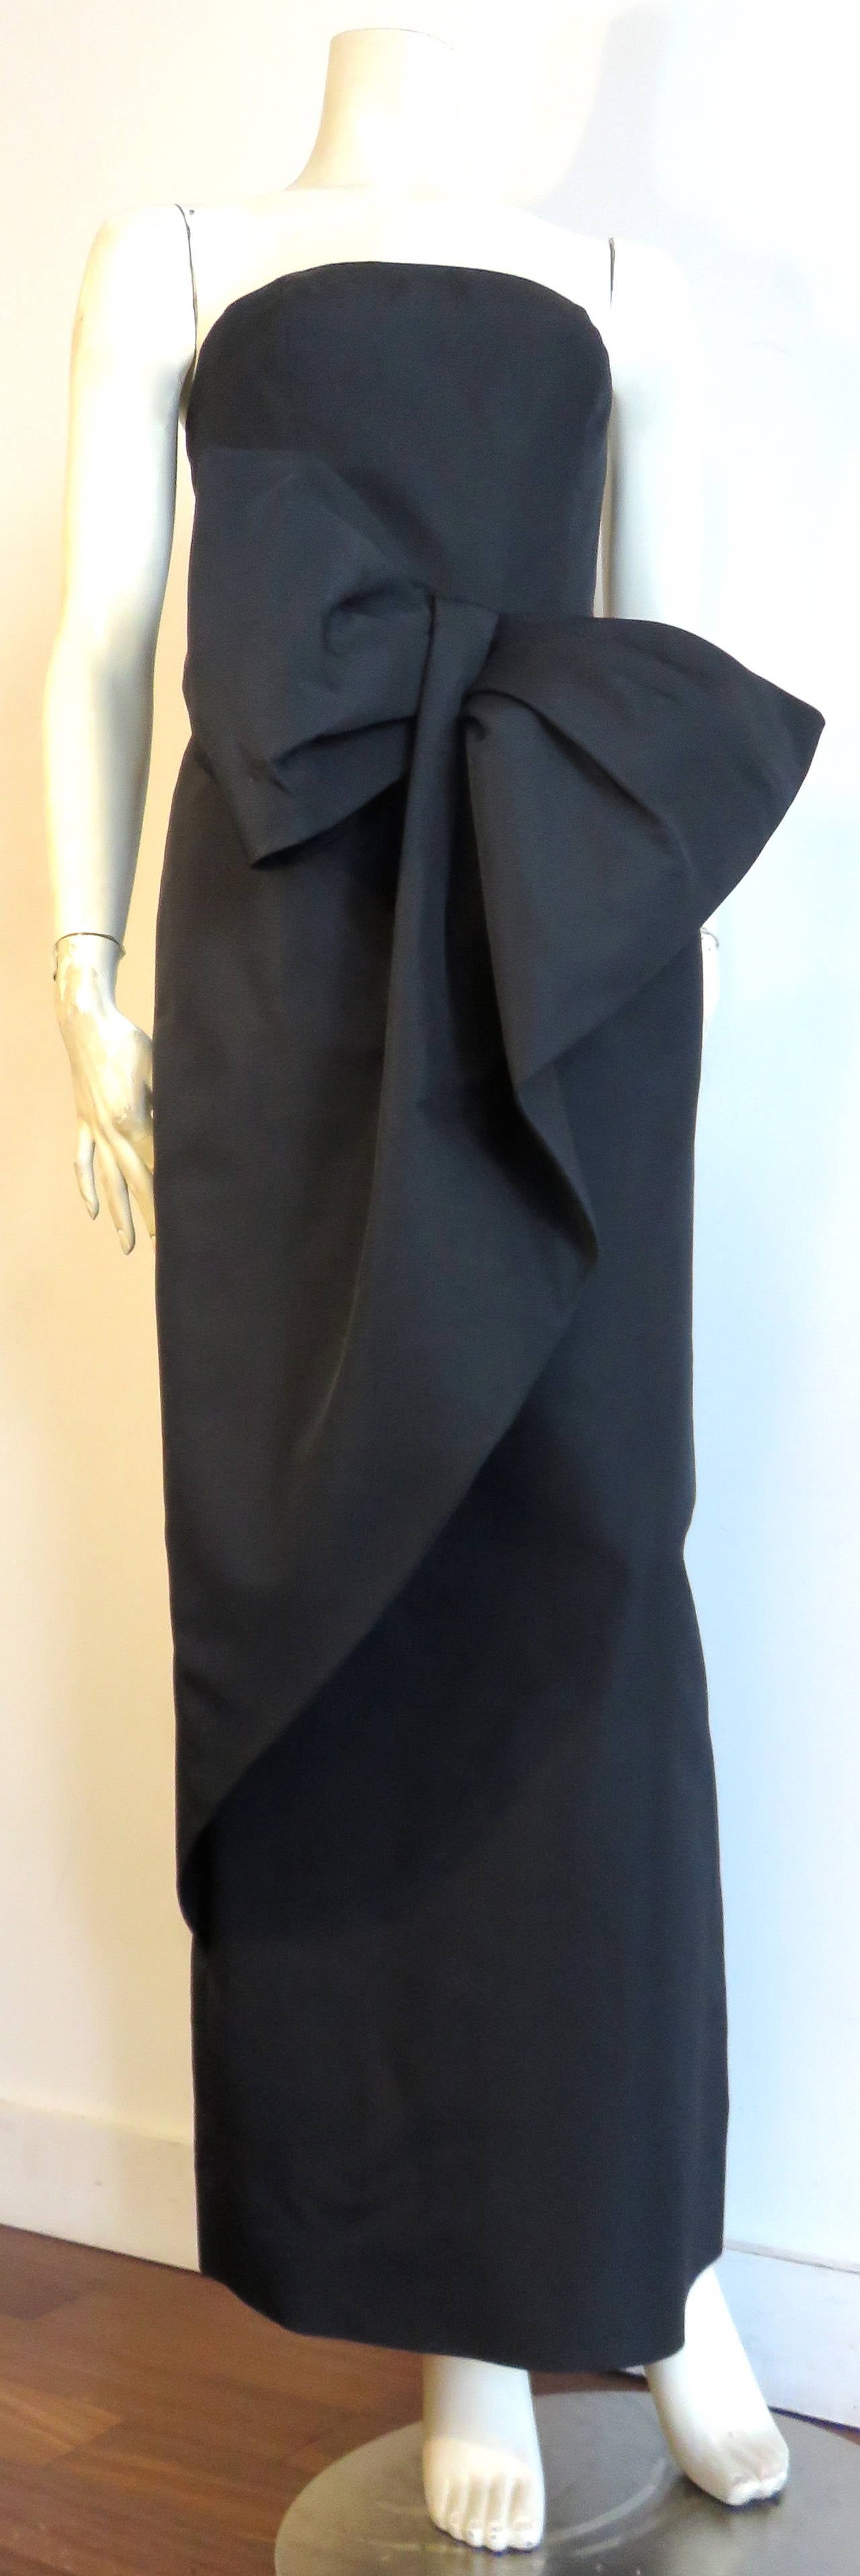 1970's MIGNON 'Gilda' inspired evening dress For Sale 1